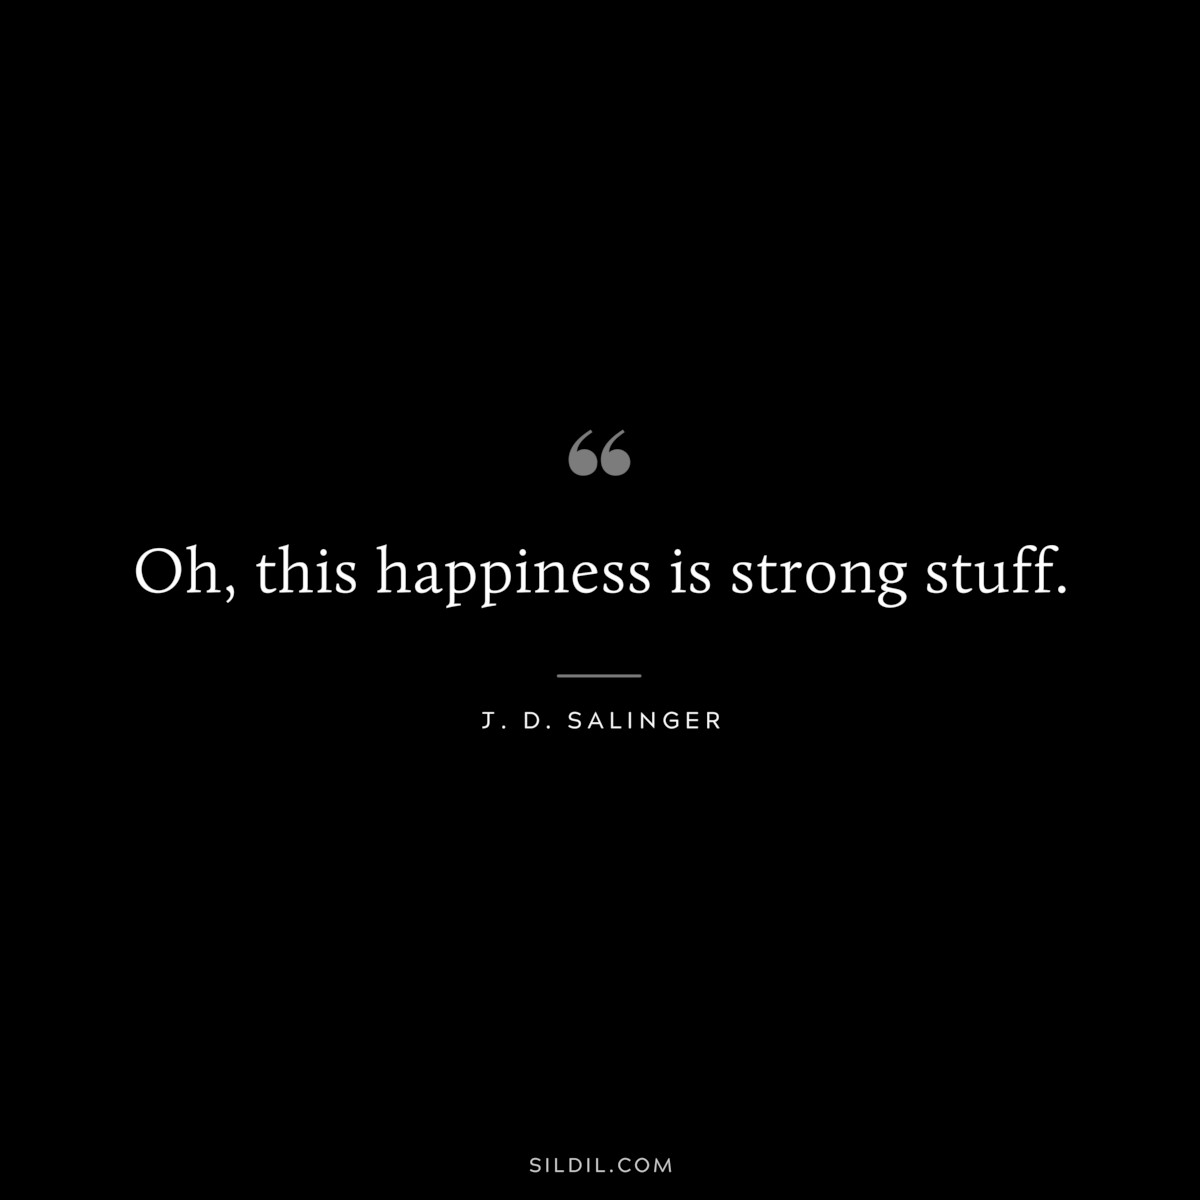 Oh, this happiness is strong stuff. — J. D. Salinger